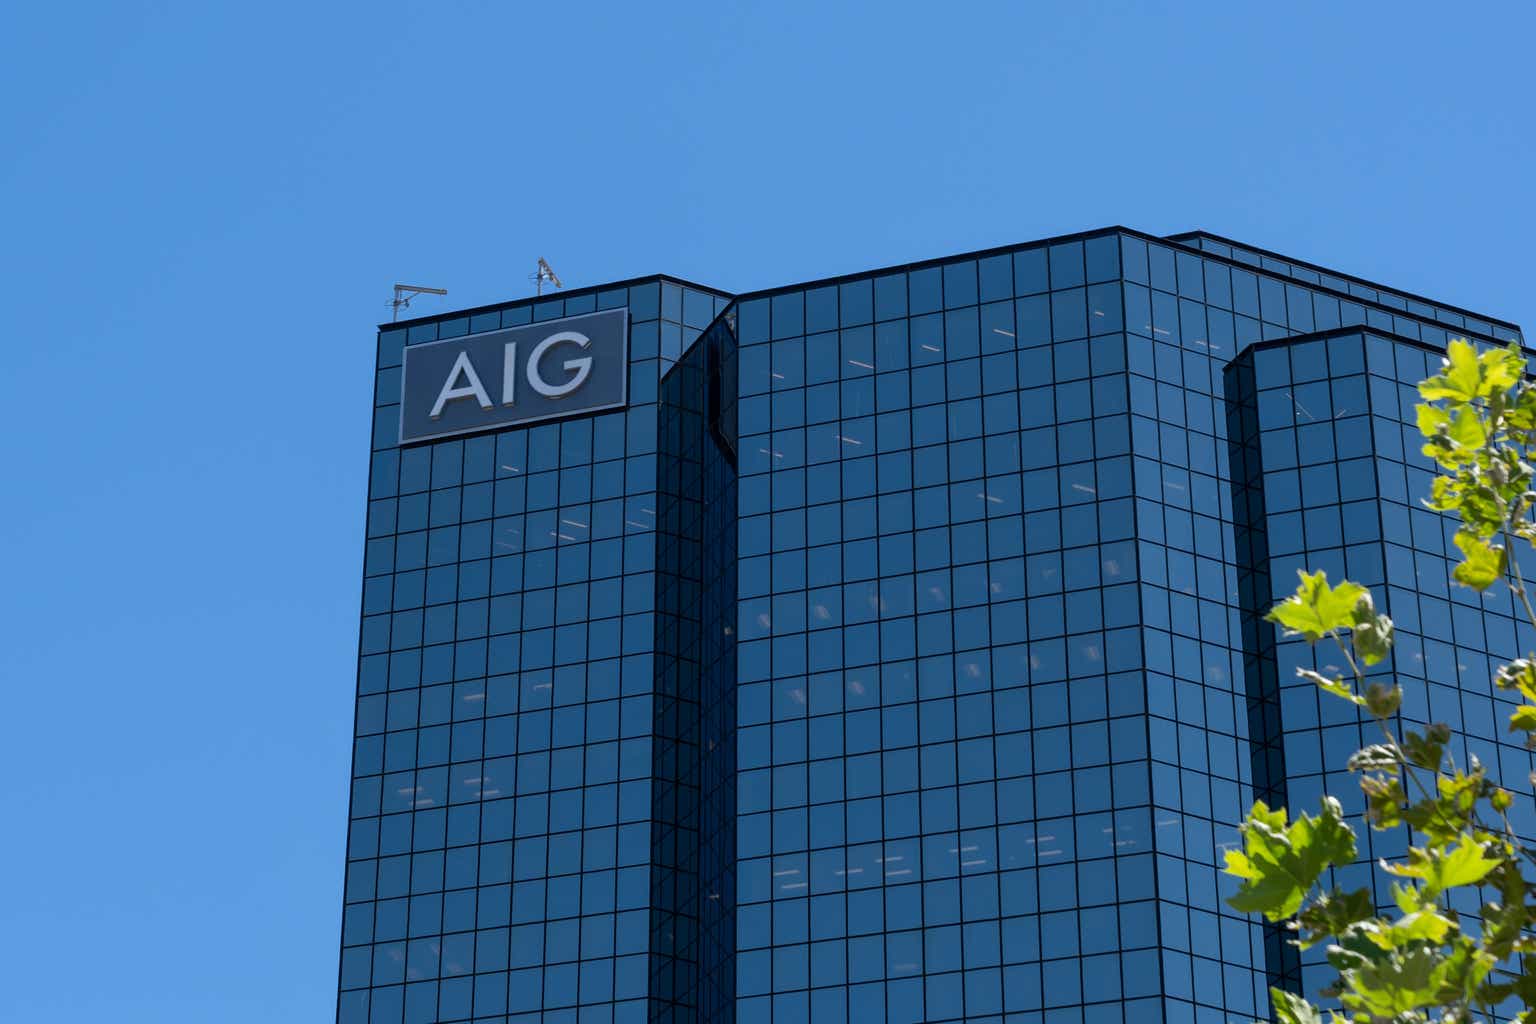 American International Stock: Business Simplifying, Shares Appear Fully Valued (NYSE:AIG)